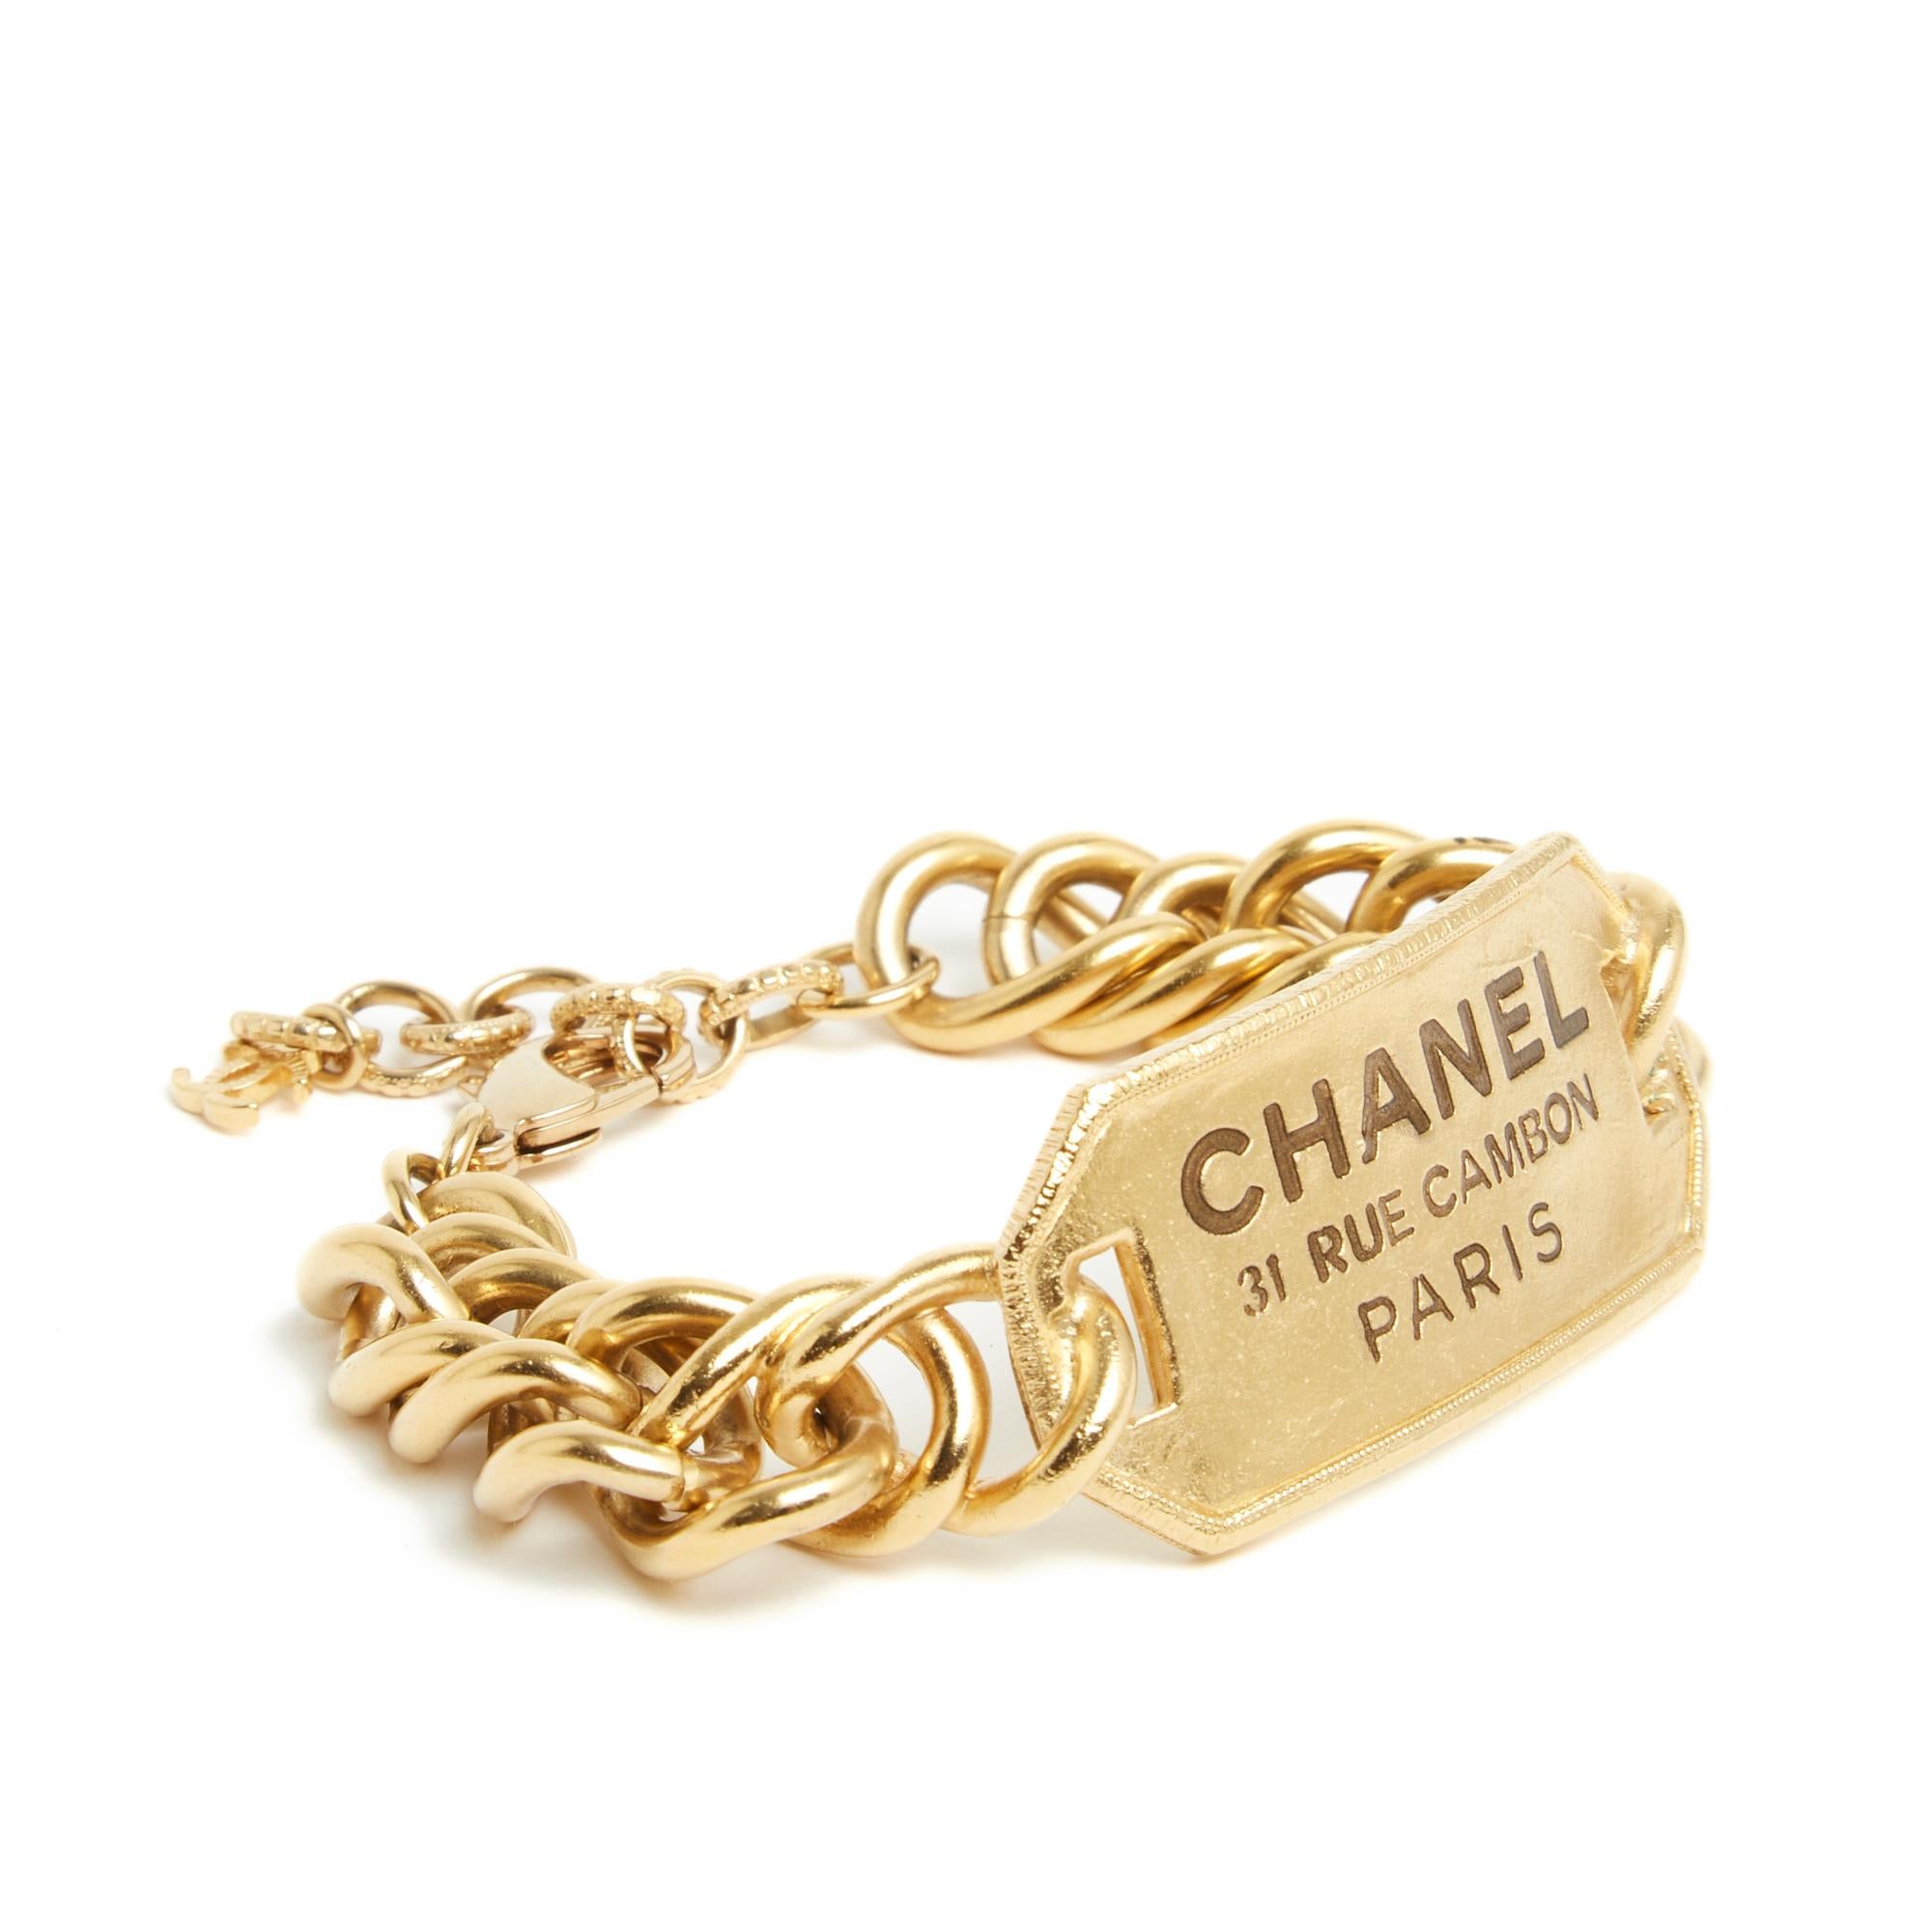 Chanel bracelet SS2020 collection composed of a wide curb chain and a plaque engraved with Chanel and its legendary address, closing with a carabiner on a chain ending with a small CC symbol. Length of the bracelet 17 cm excluding the chain and 21